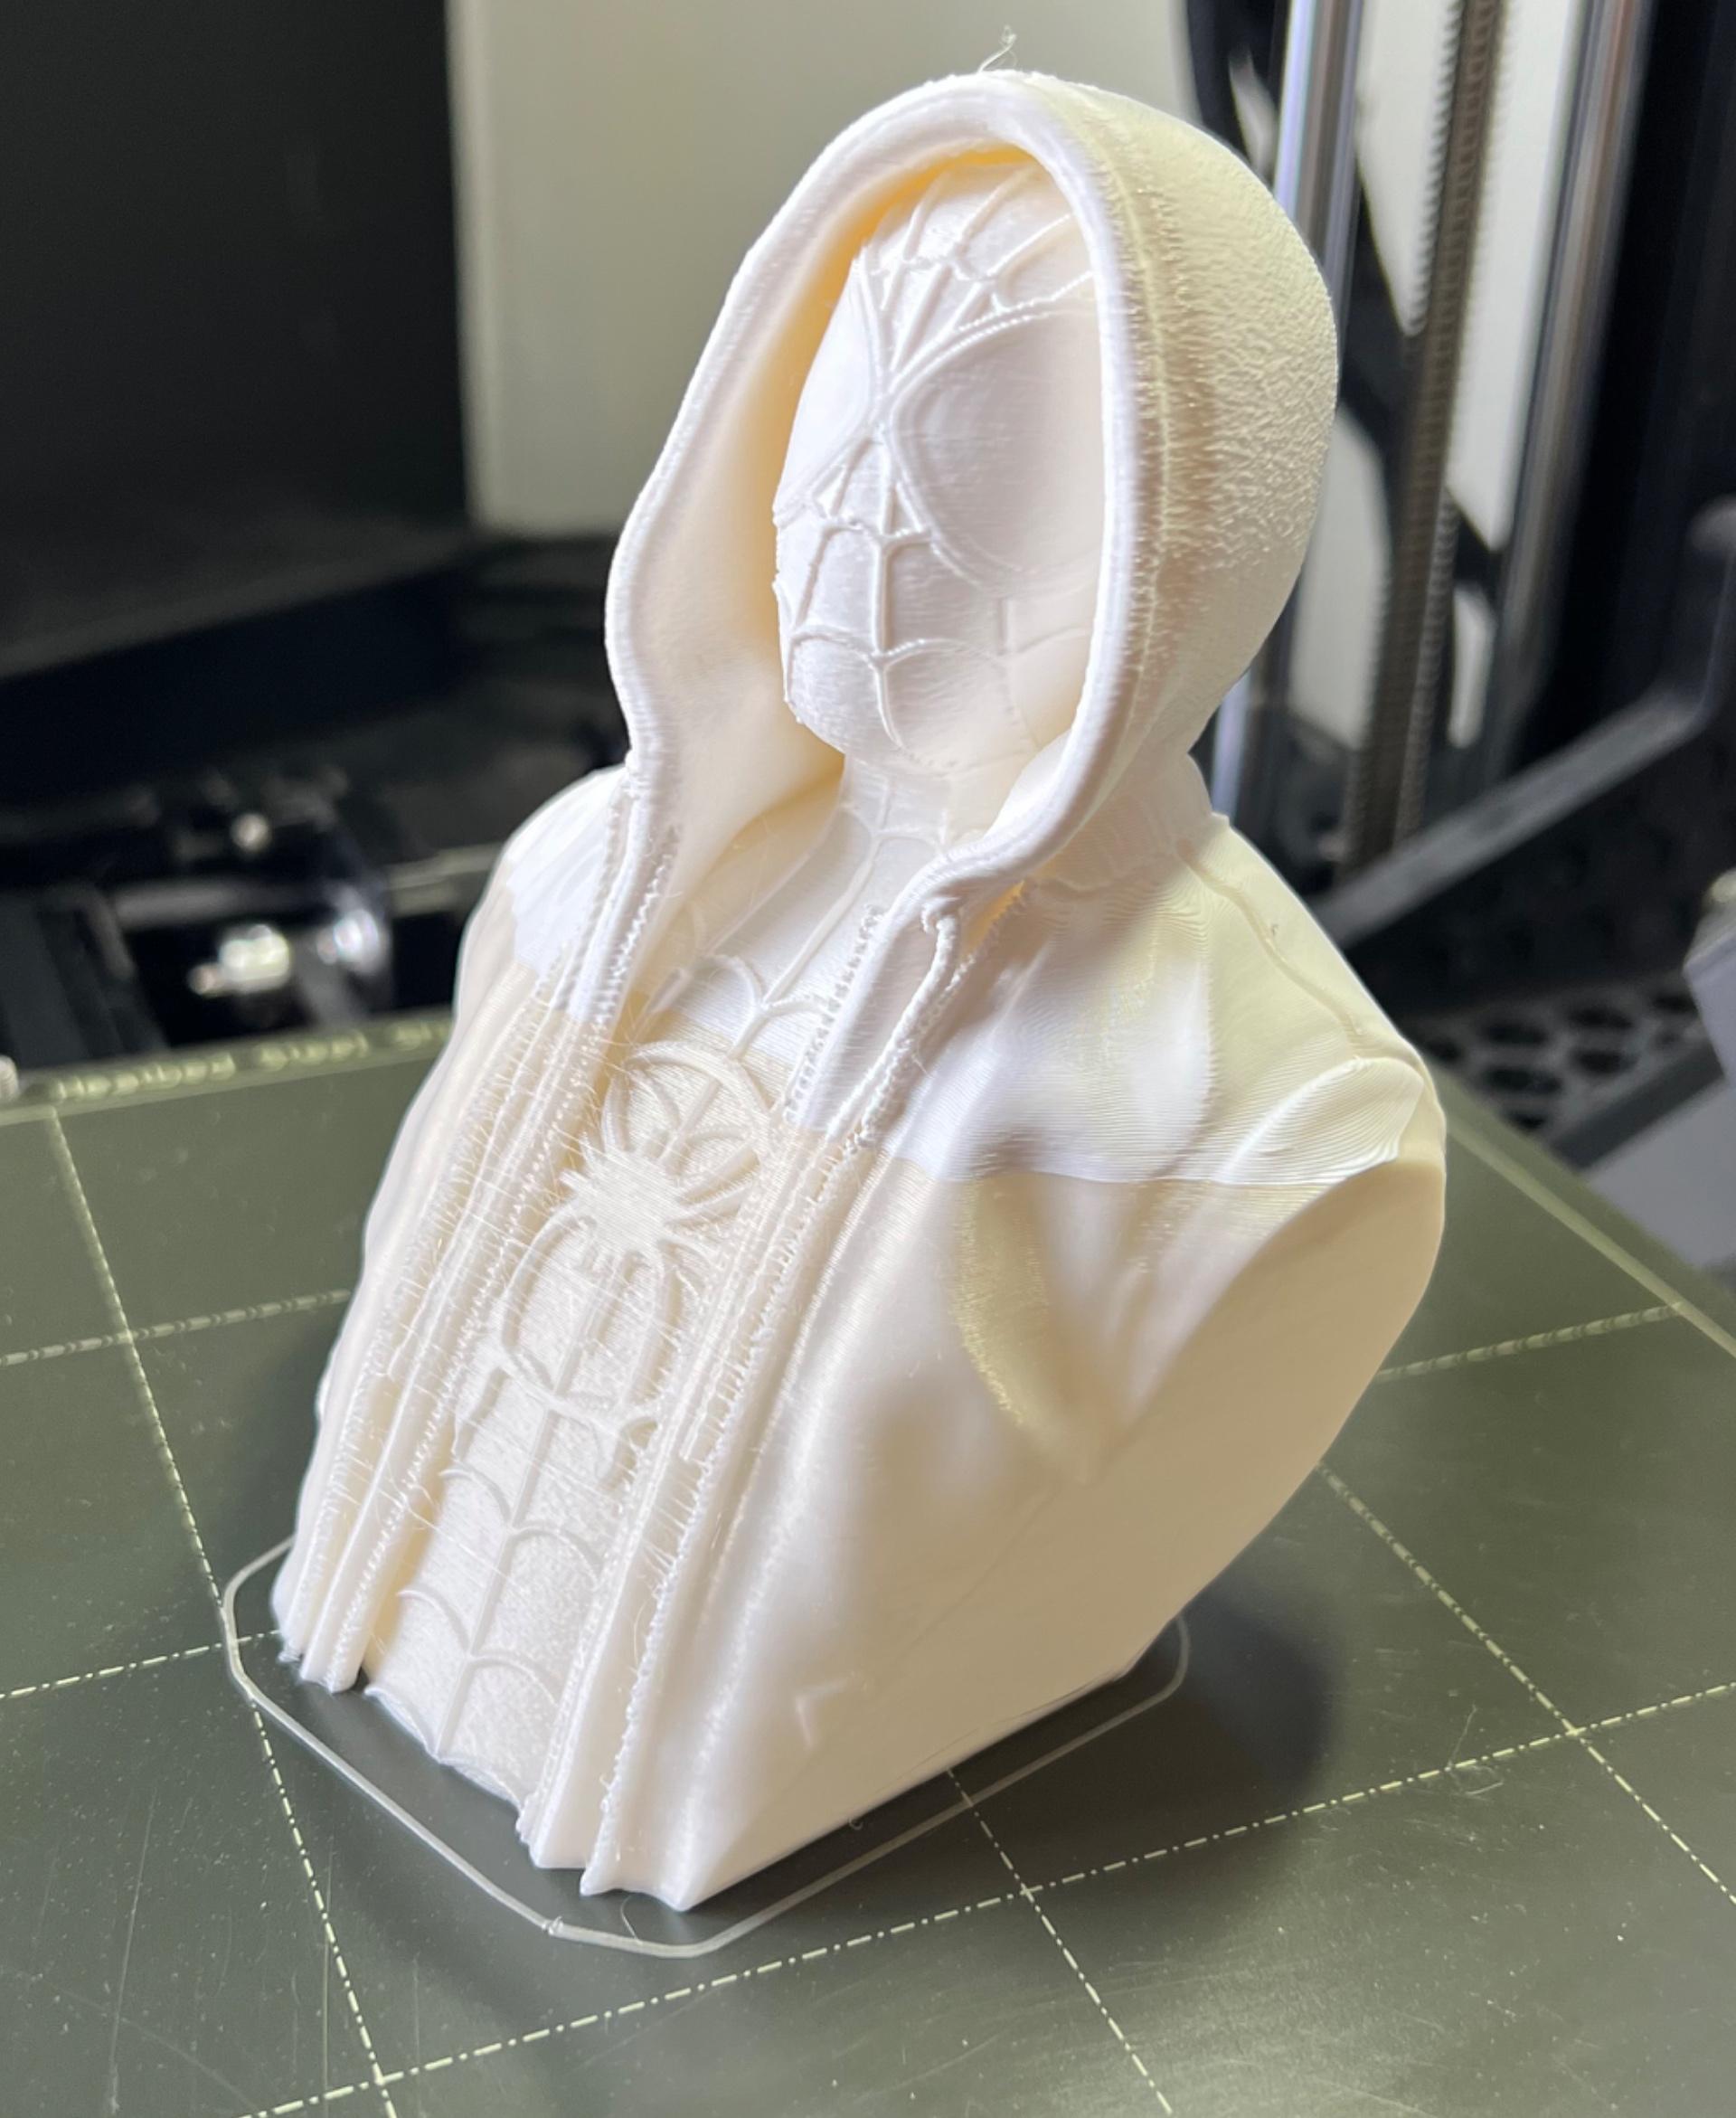 Miles Morales Spiderman (Pre-Supported) - Ran out of filament halfway through. Printer with lightning infill and variable layer height. - 3d model